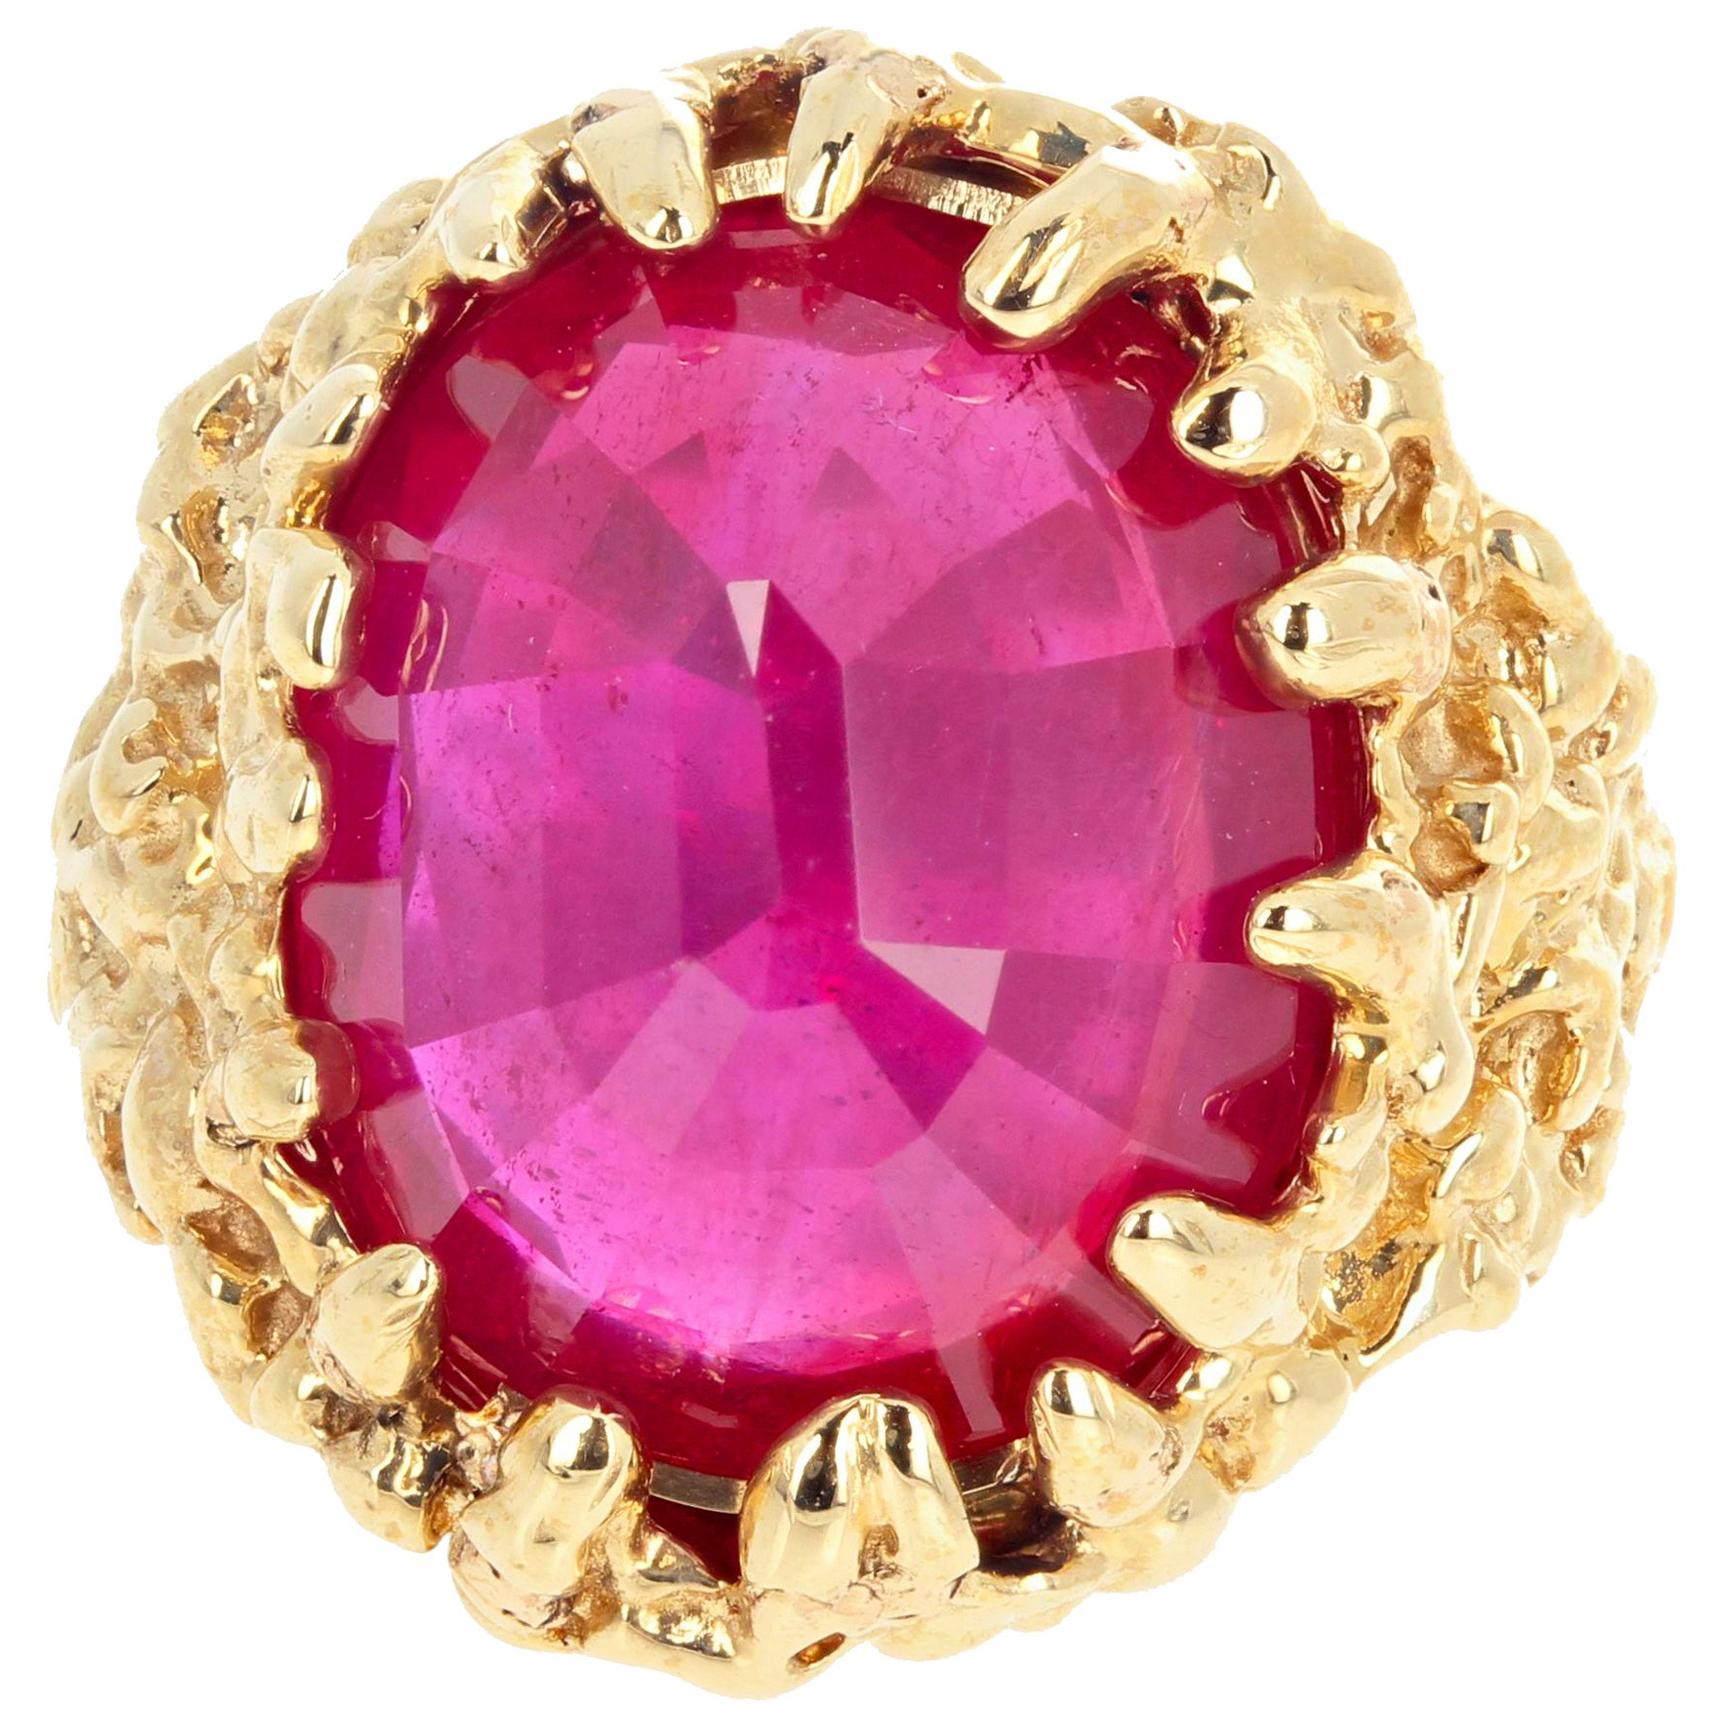 AJD Dramatic Impressive Huge 14 Ct. Ruby in 14 Kt Yellow Gold Cocktail Ring For Sale